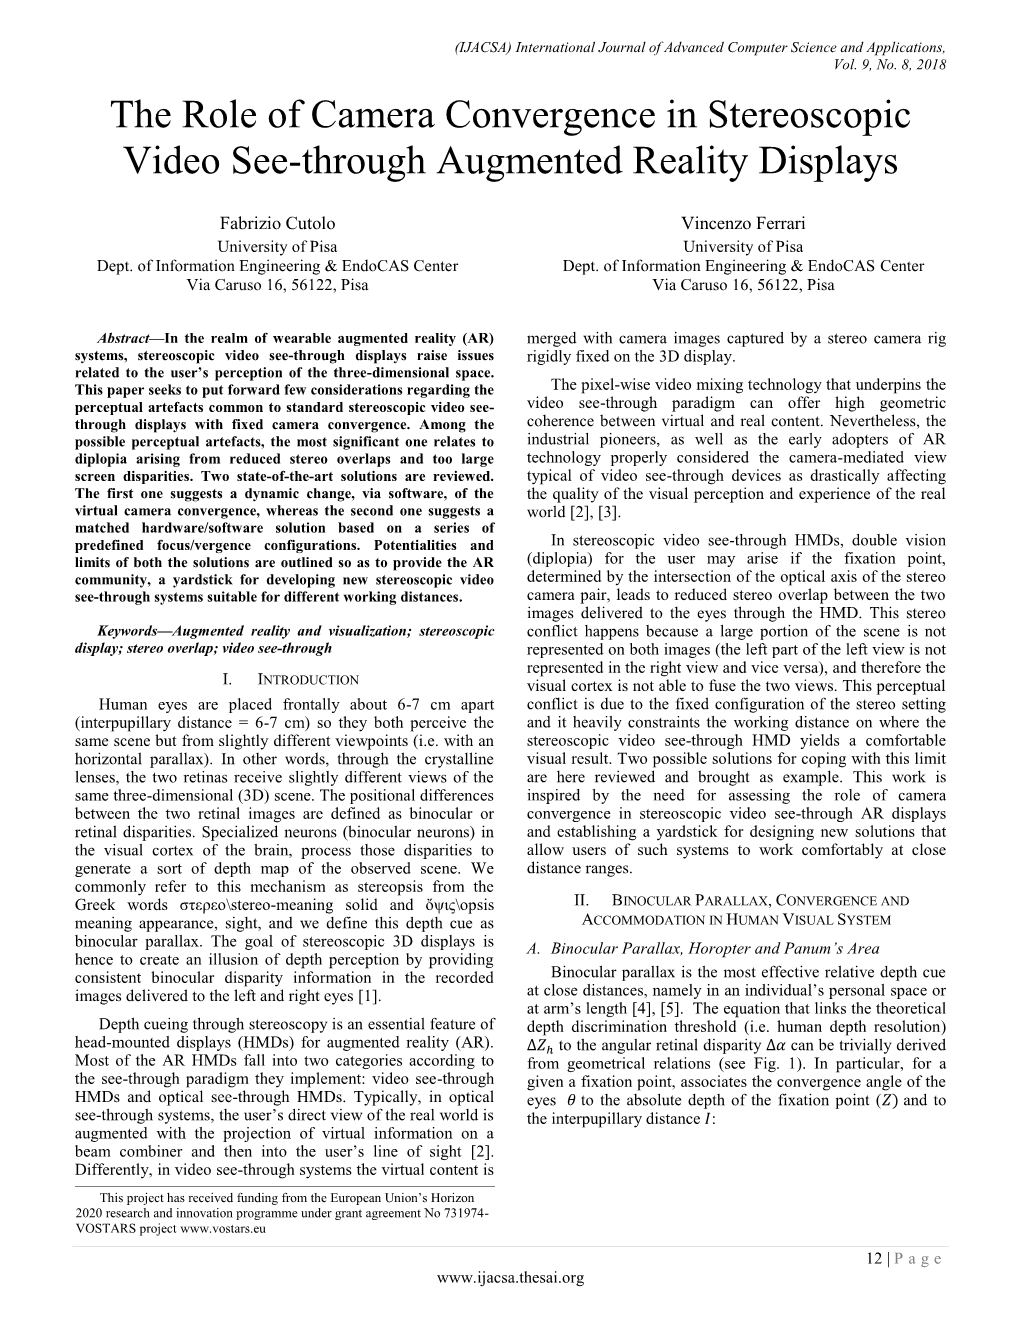 The Role of Camera Convergence in Stereoscopic Video See-Through Augmented Reality Displays